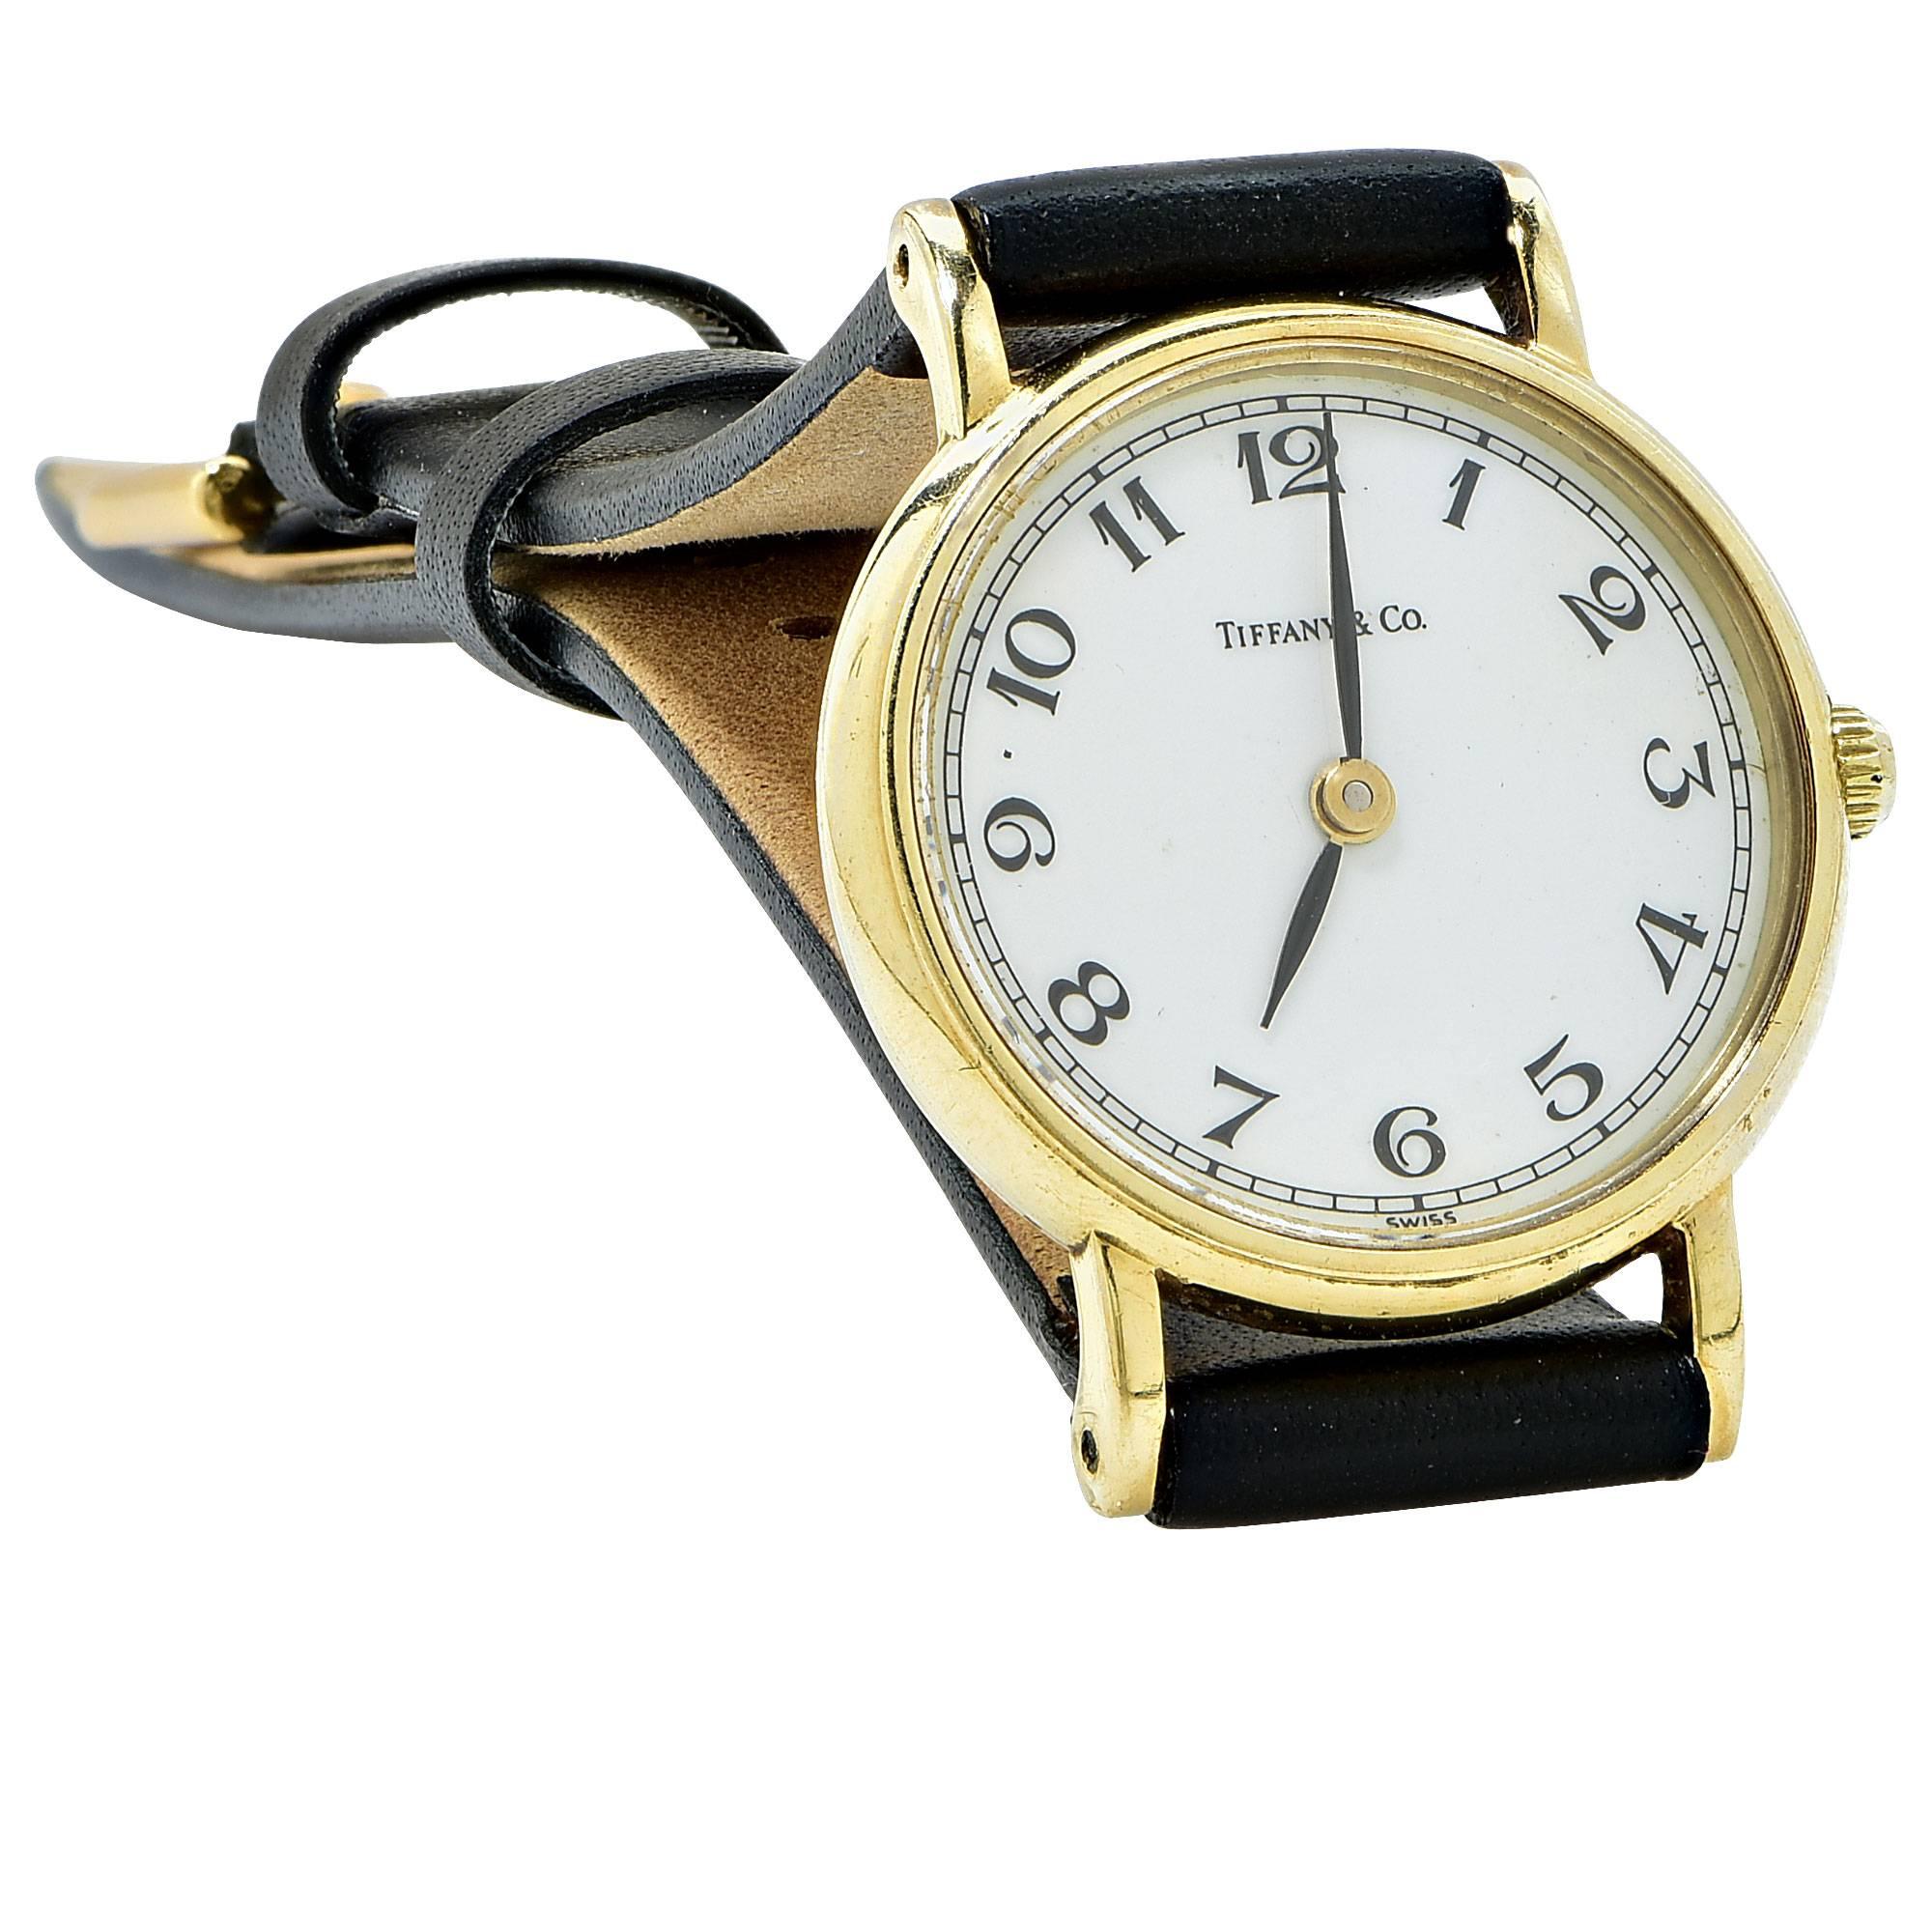 Tiffany & Co. 14k yellow gold watch.

It is stamped and tested as 14k gold.
The metal weight is 13.83 grams.

This Tiffany & Co. watch is accompanied by a retail appraisal performed by a GIA Graduate Gemologist.